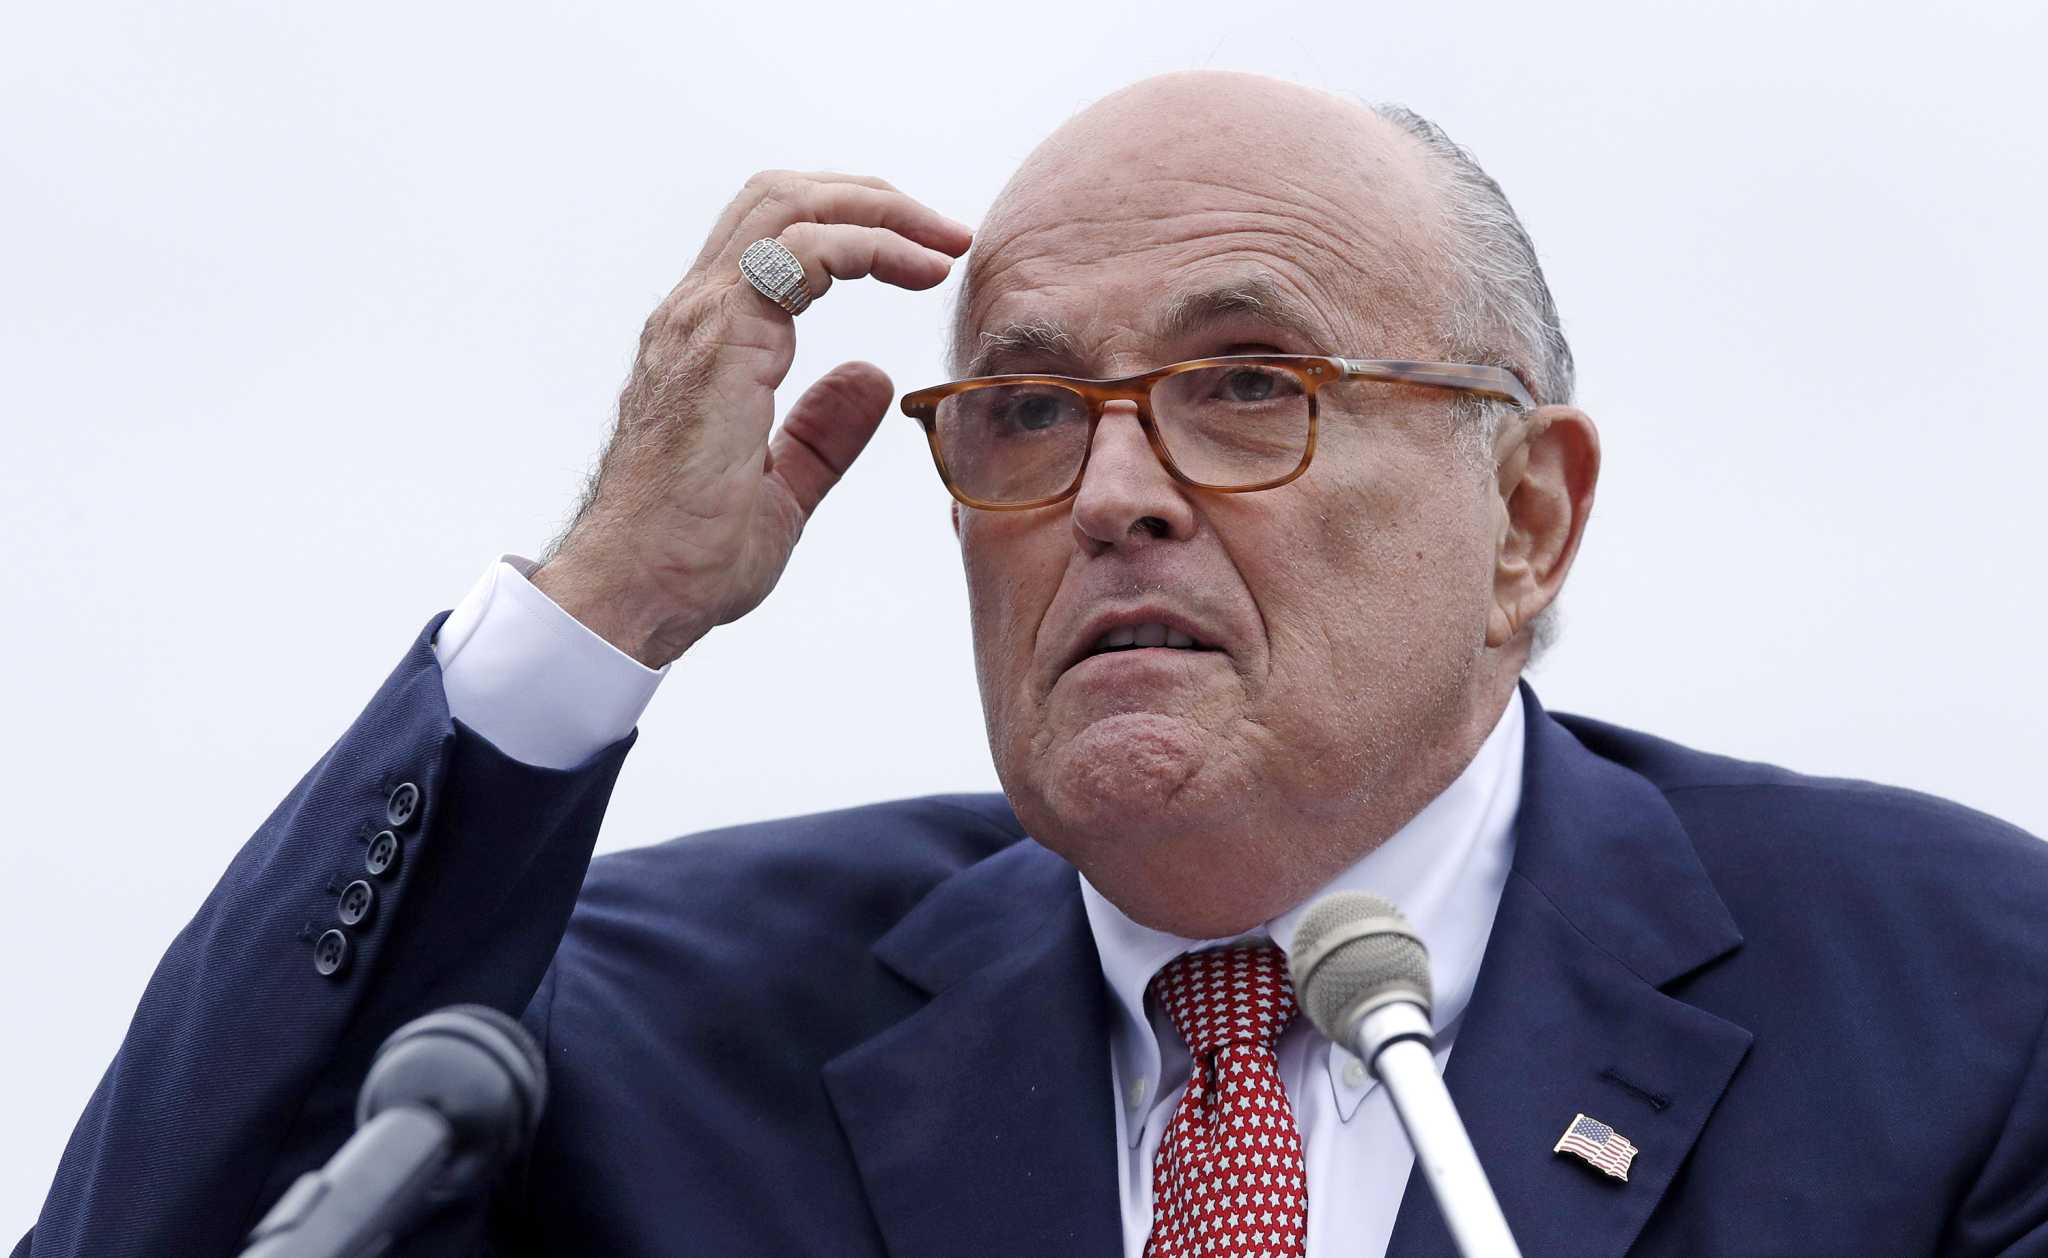 Colonie accounting firm sues Giuliani to collect K for divorce work